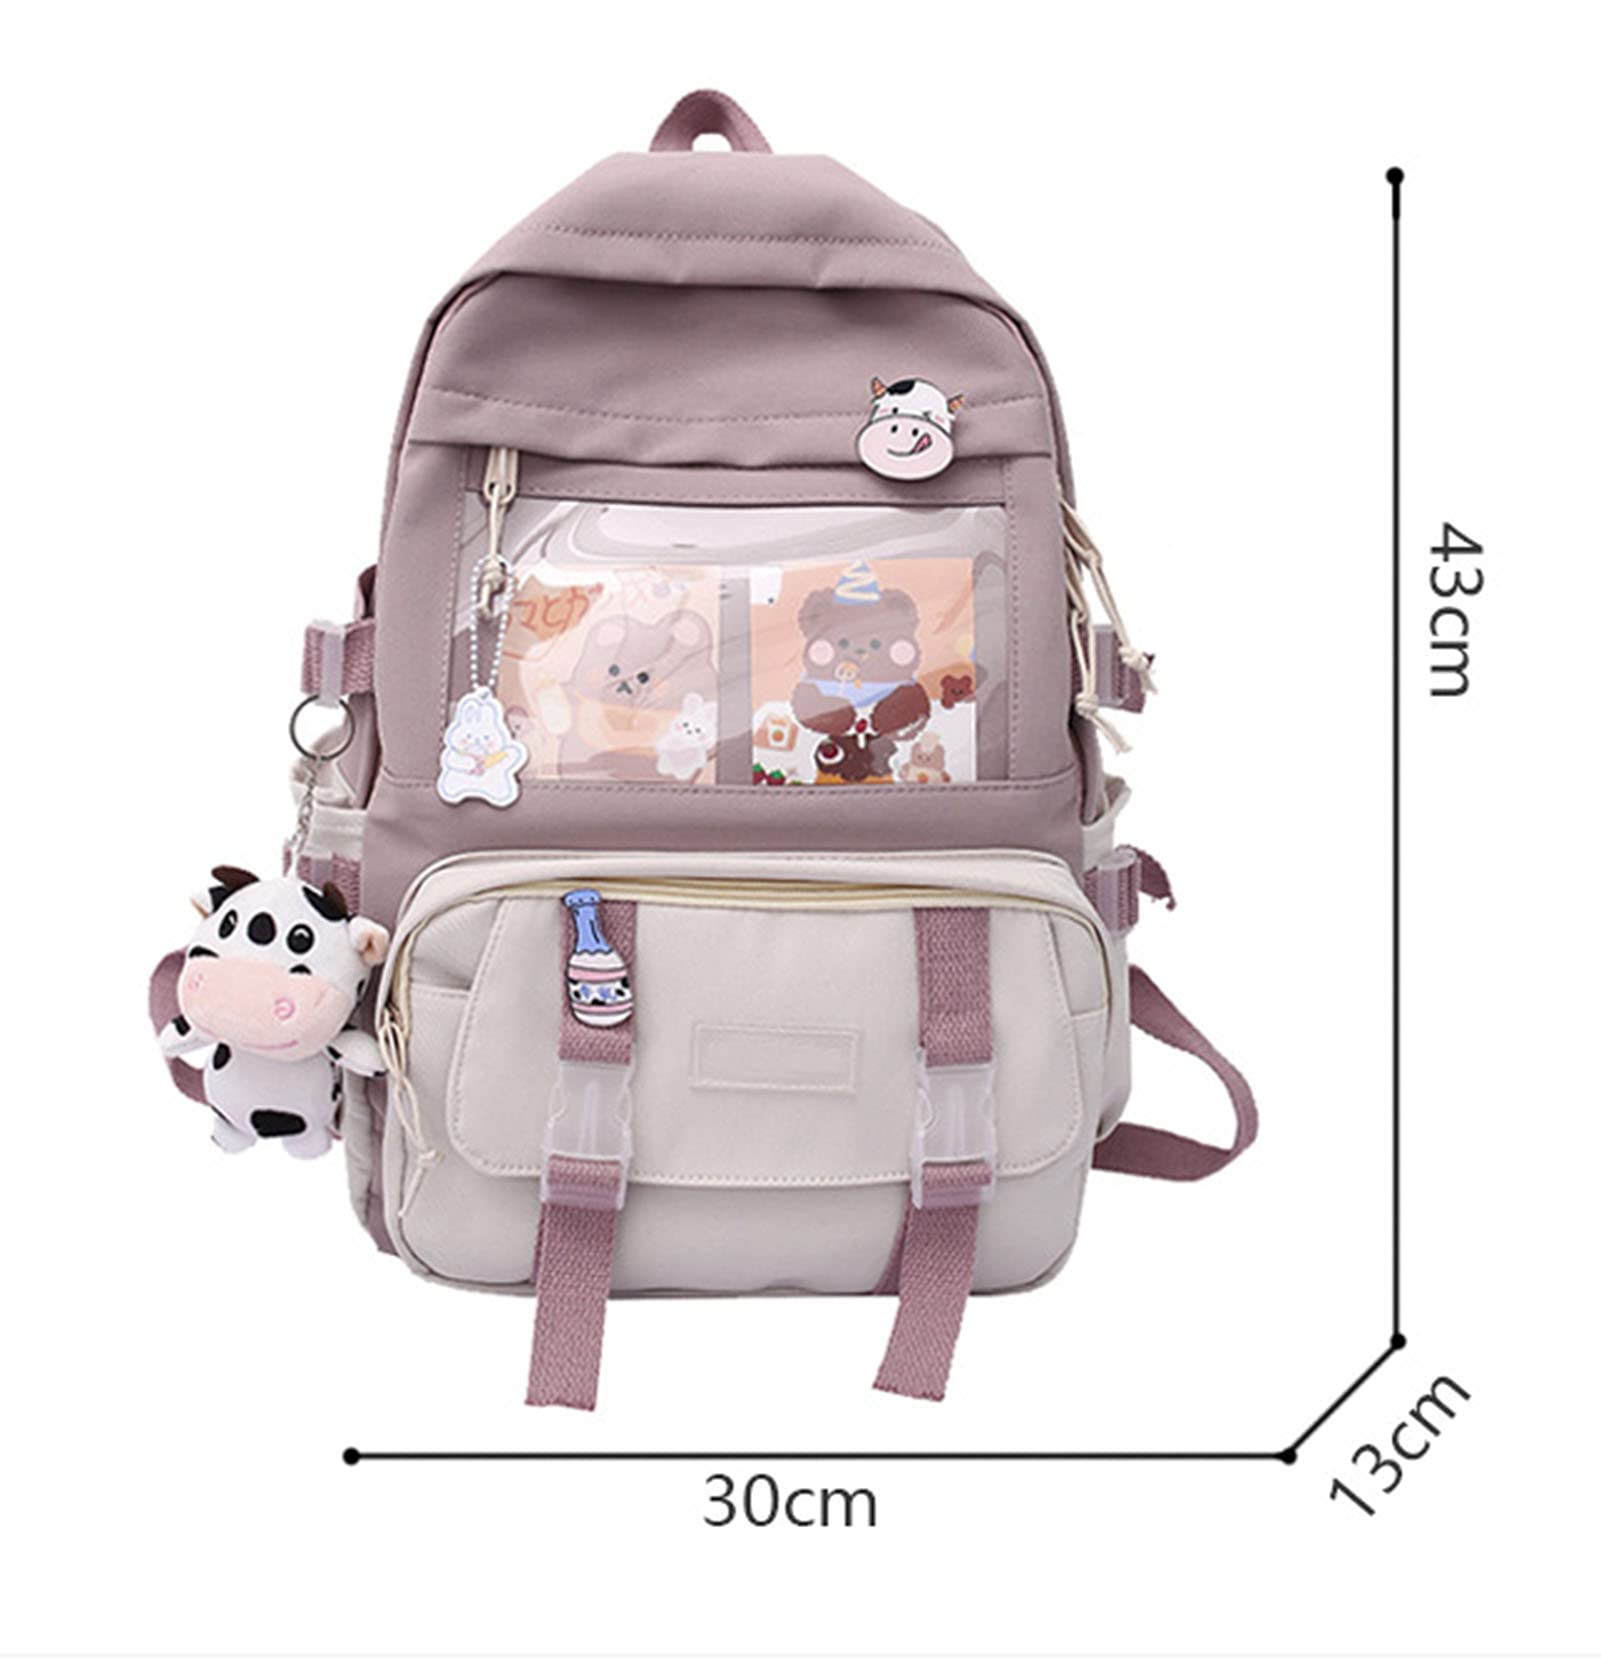 JELLYEA Kawaii School Backpack for Girls with Milk Cow Keychain and Cute Pin School Bookbag Teens Backpack Middle Elementary